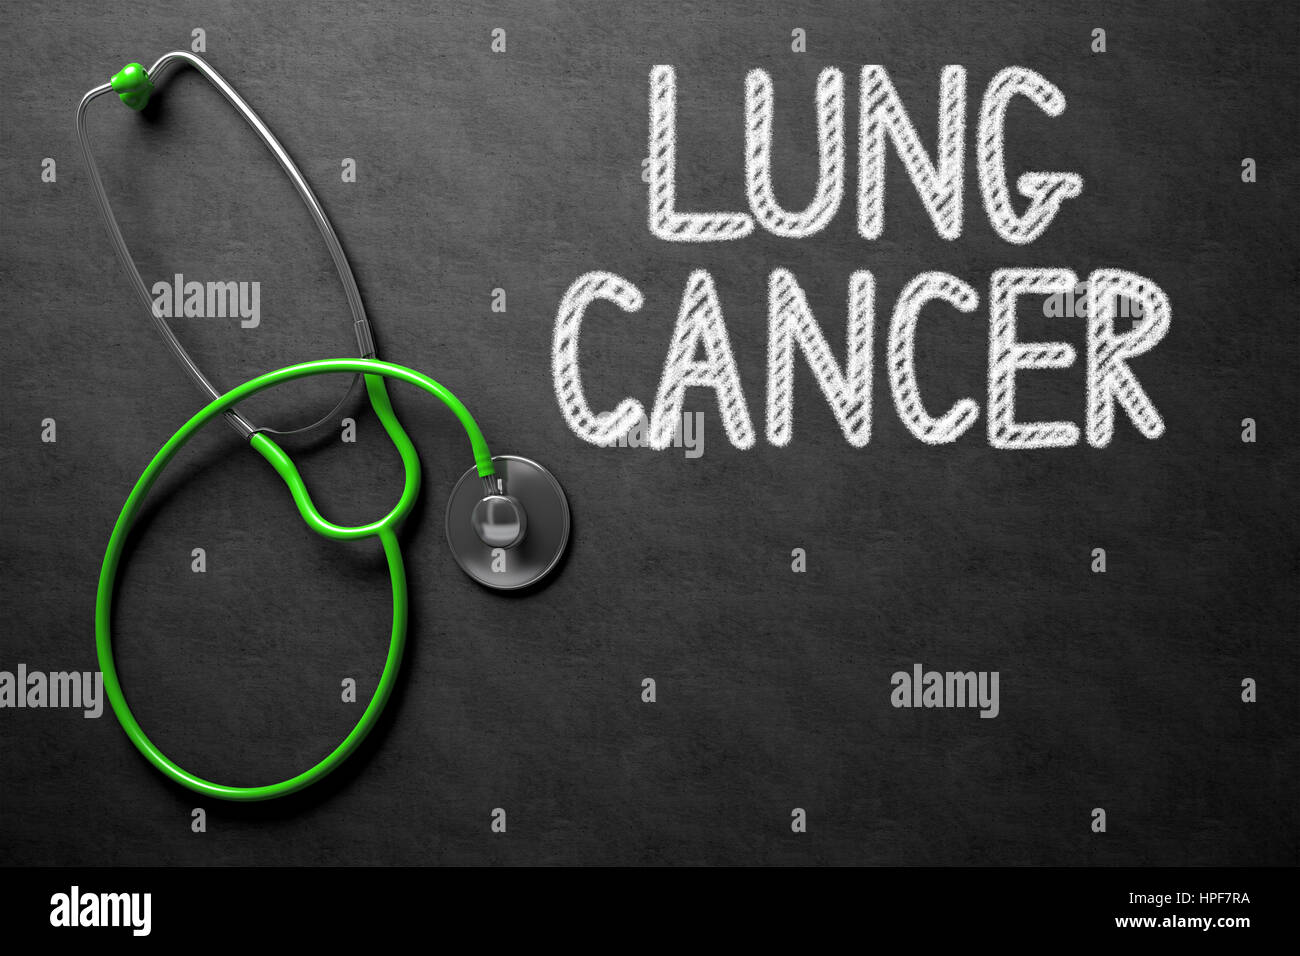 Medical Concept: Lung Cancer - Medical Concept on Black Chalkboard. Medical Concept: Black Chalkboard with Lung Cancer. 3D Rendering. Stock Photo